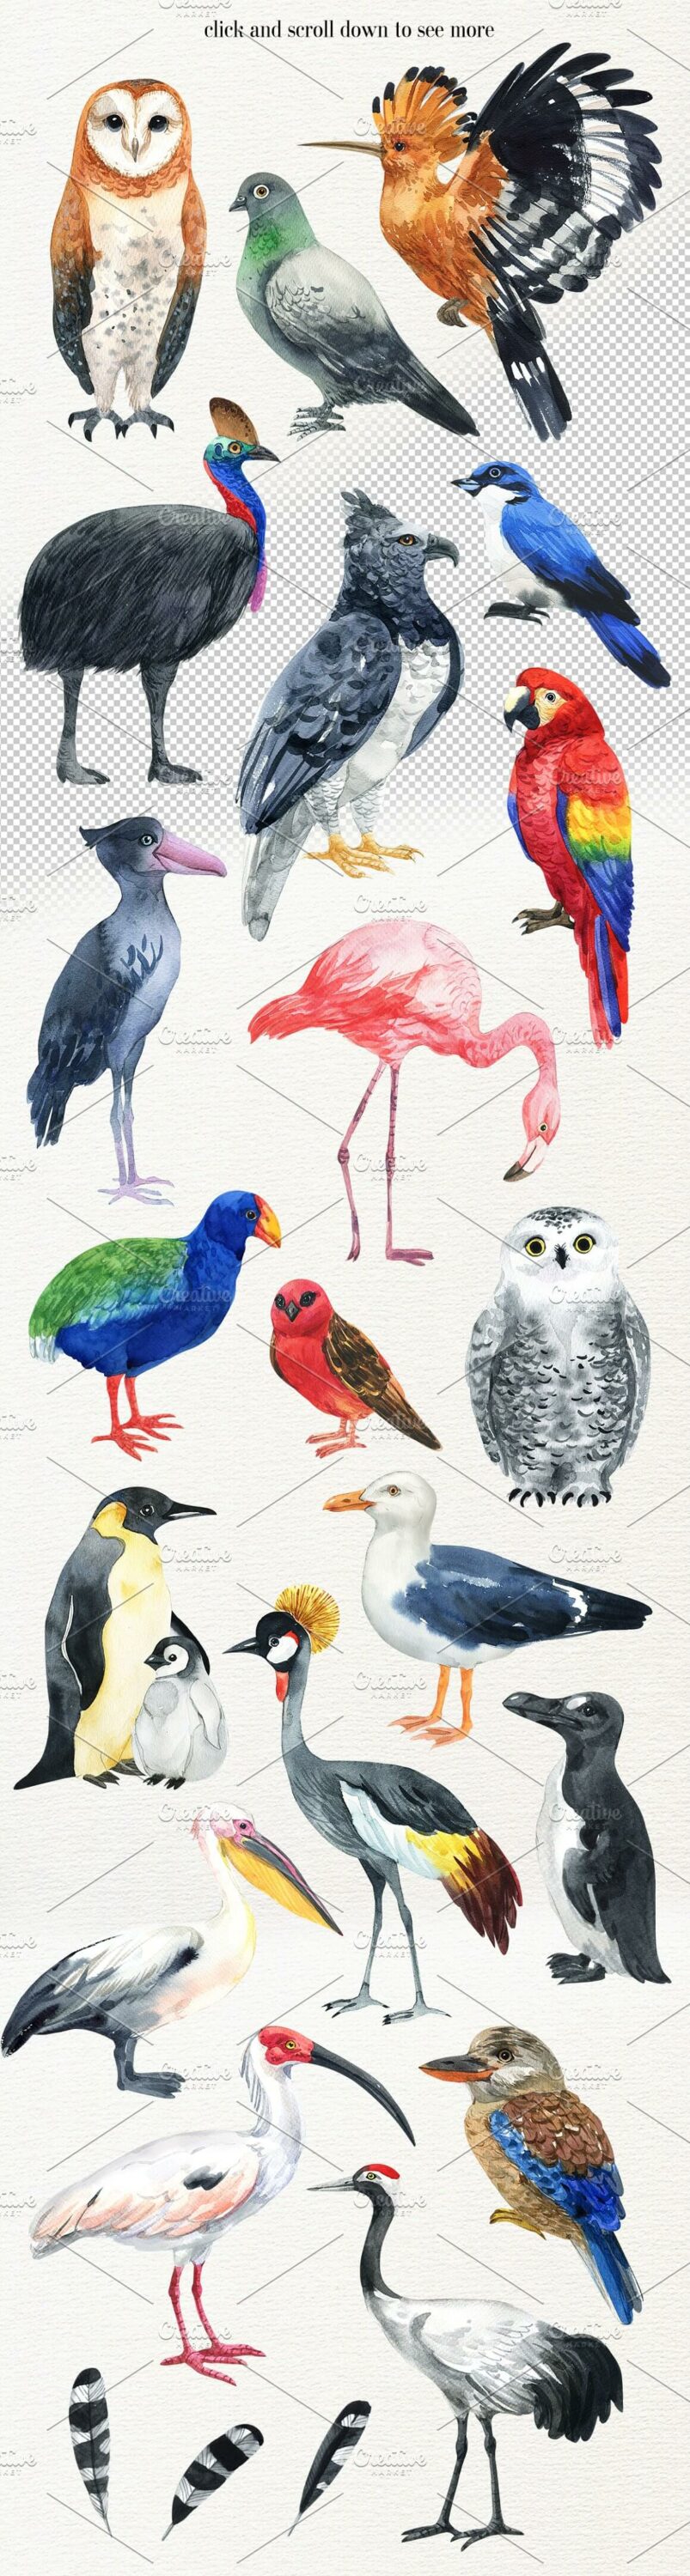 Watercolor birds illustration Set and Inscription: click and scroll down to see more.